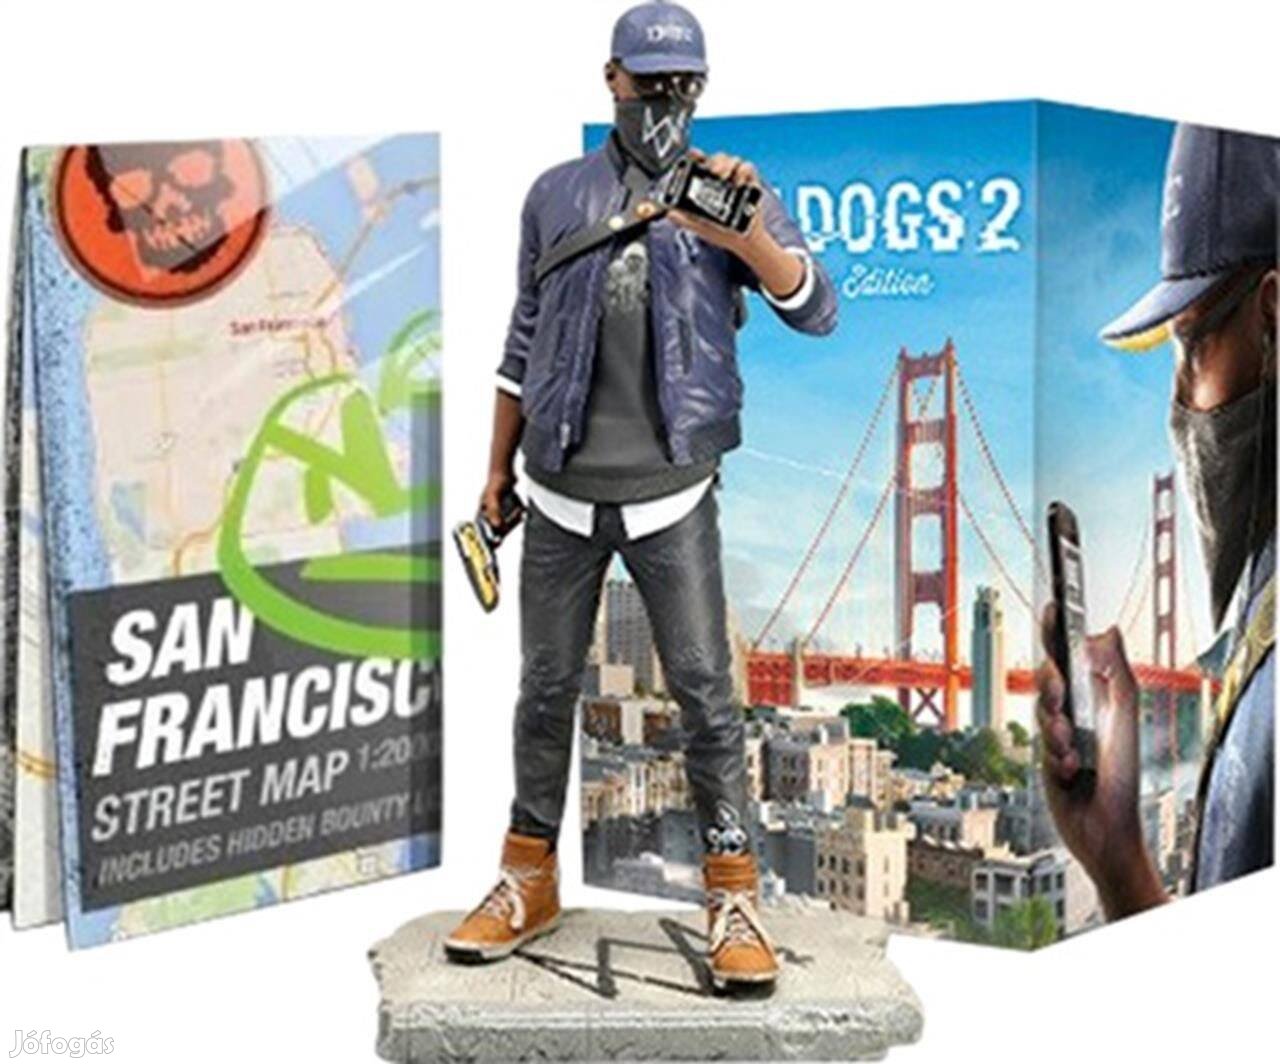 Watch Dogs 2 San Francisco Ed. wfigurine & Lithographies (No DLC) PS4